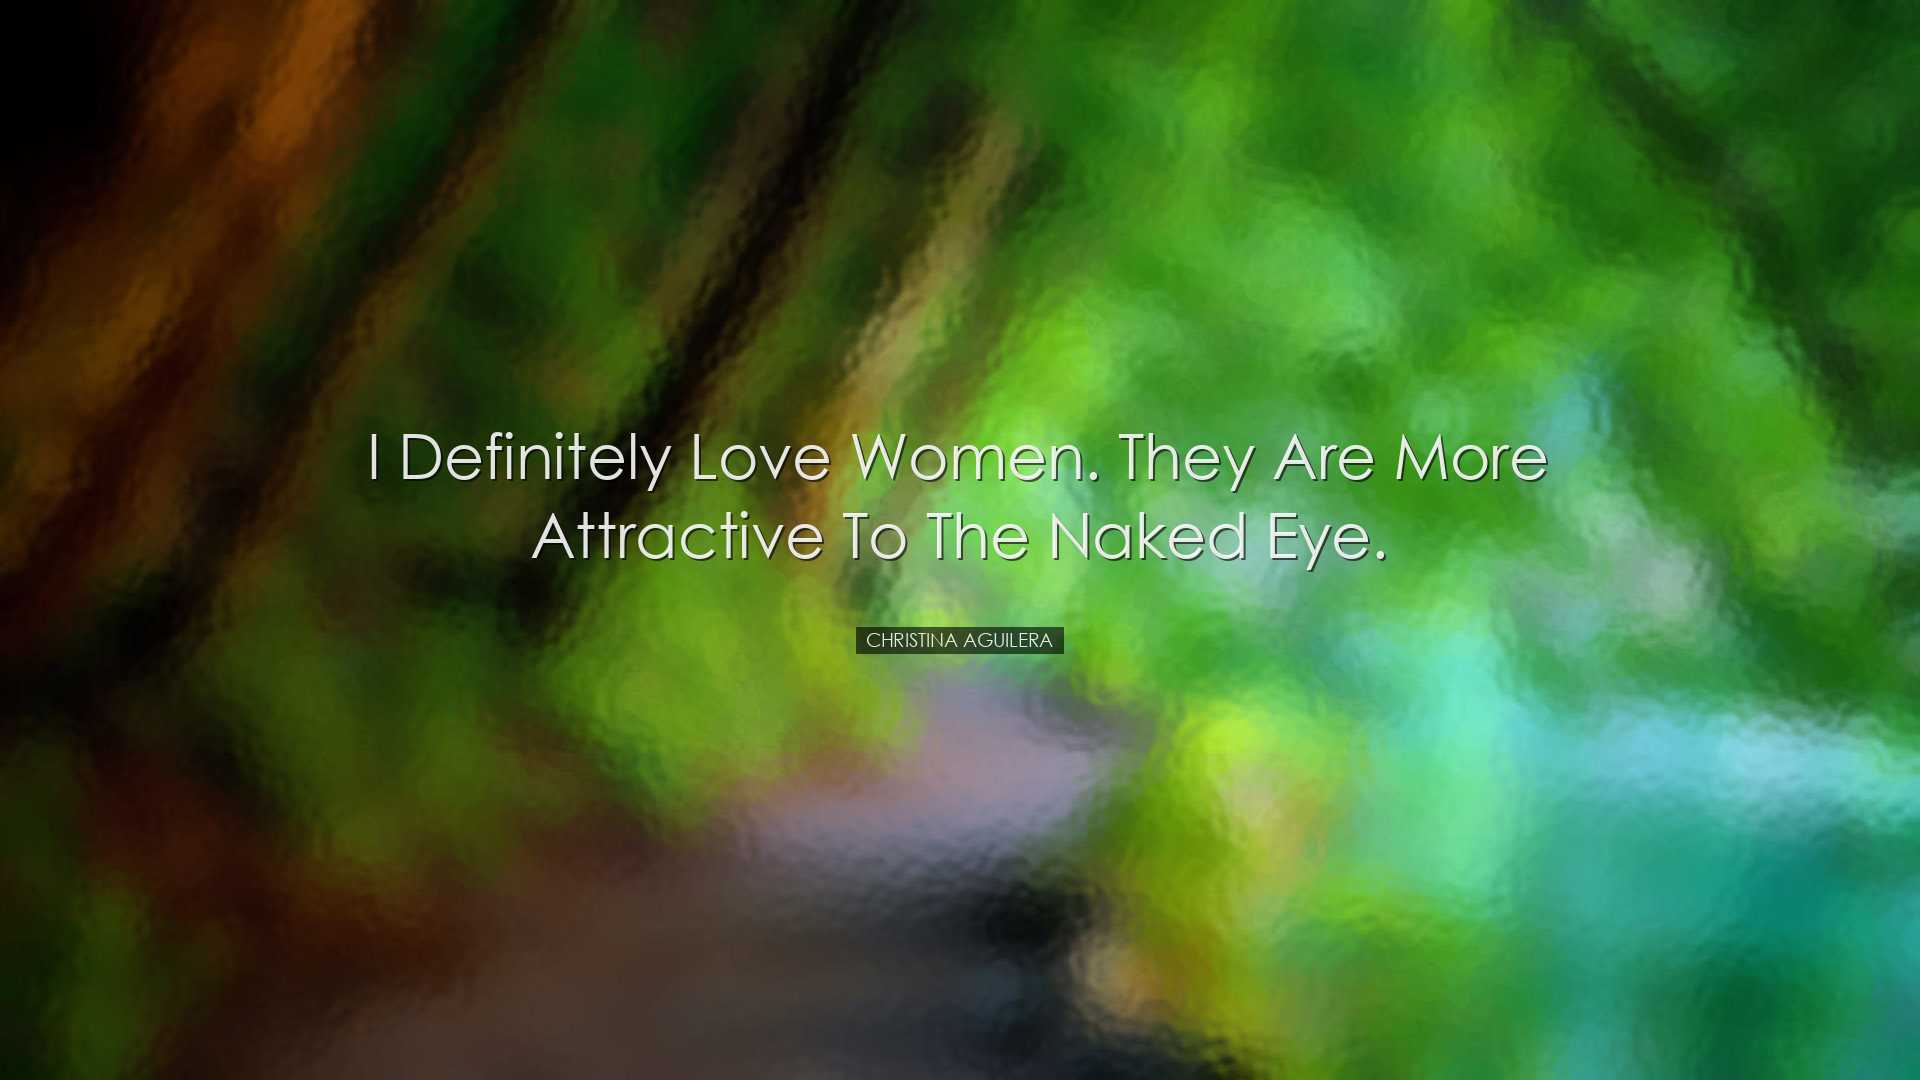 I definitely love women. They are more attractive to the naked eye